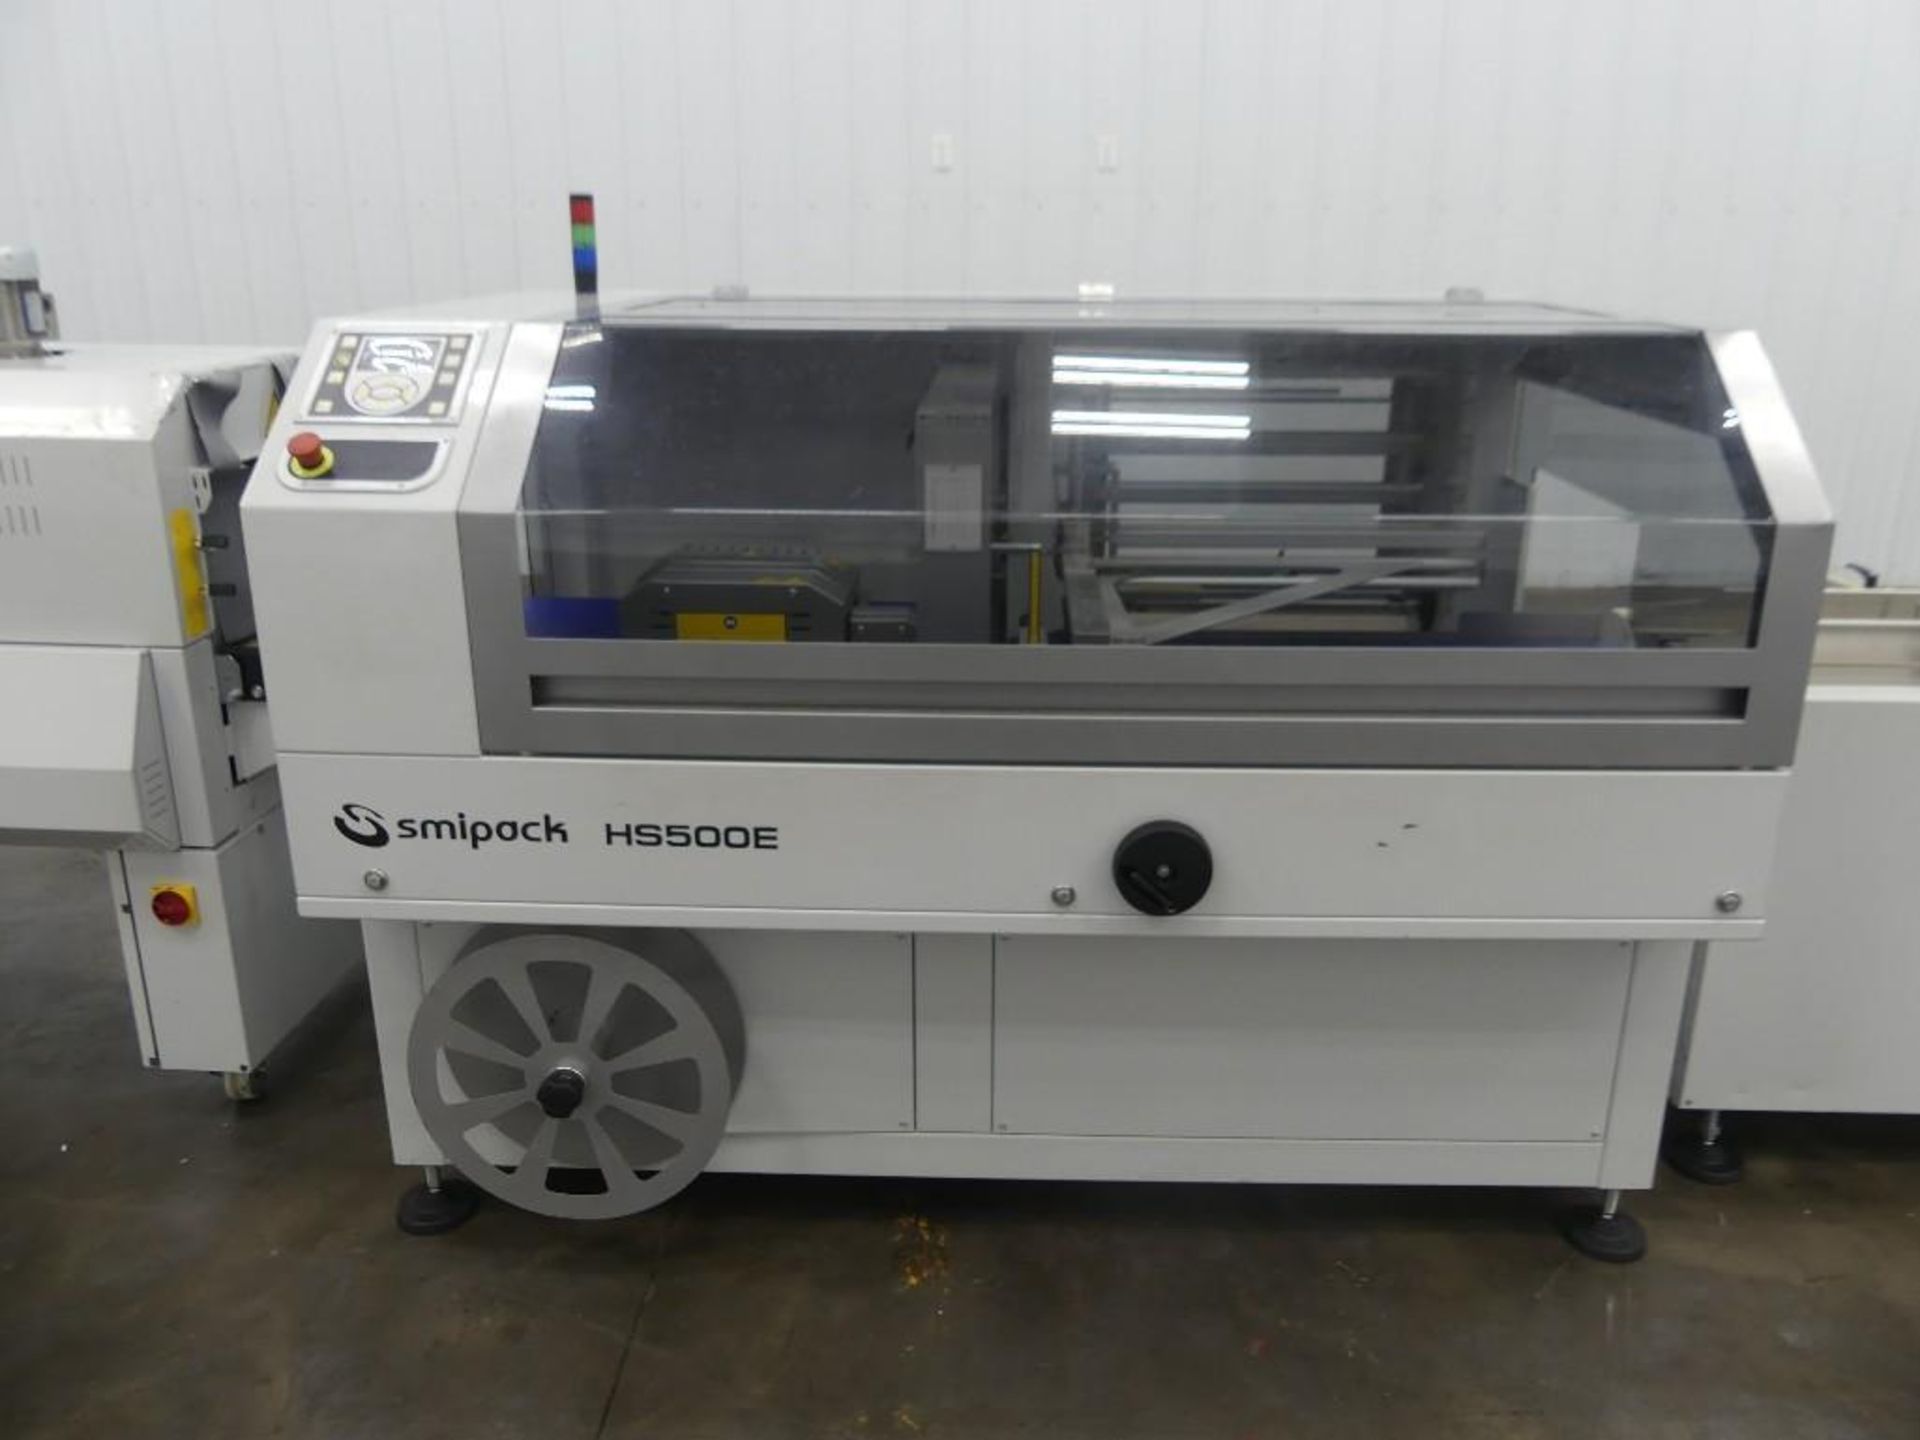 Smipack HS500E Automatic Side Sealer with Infeed and Shrink Tunnel - Image 12 of 76